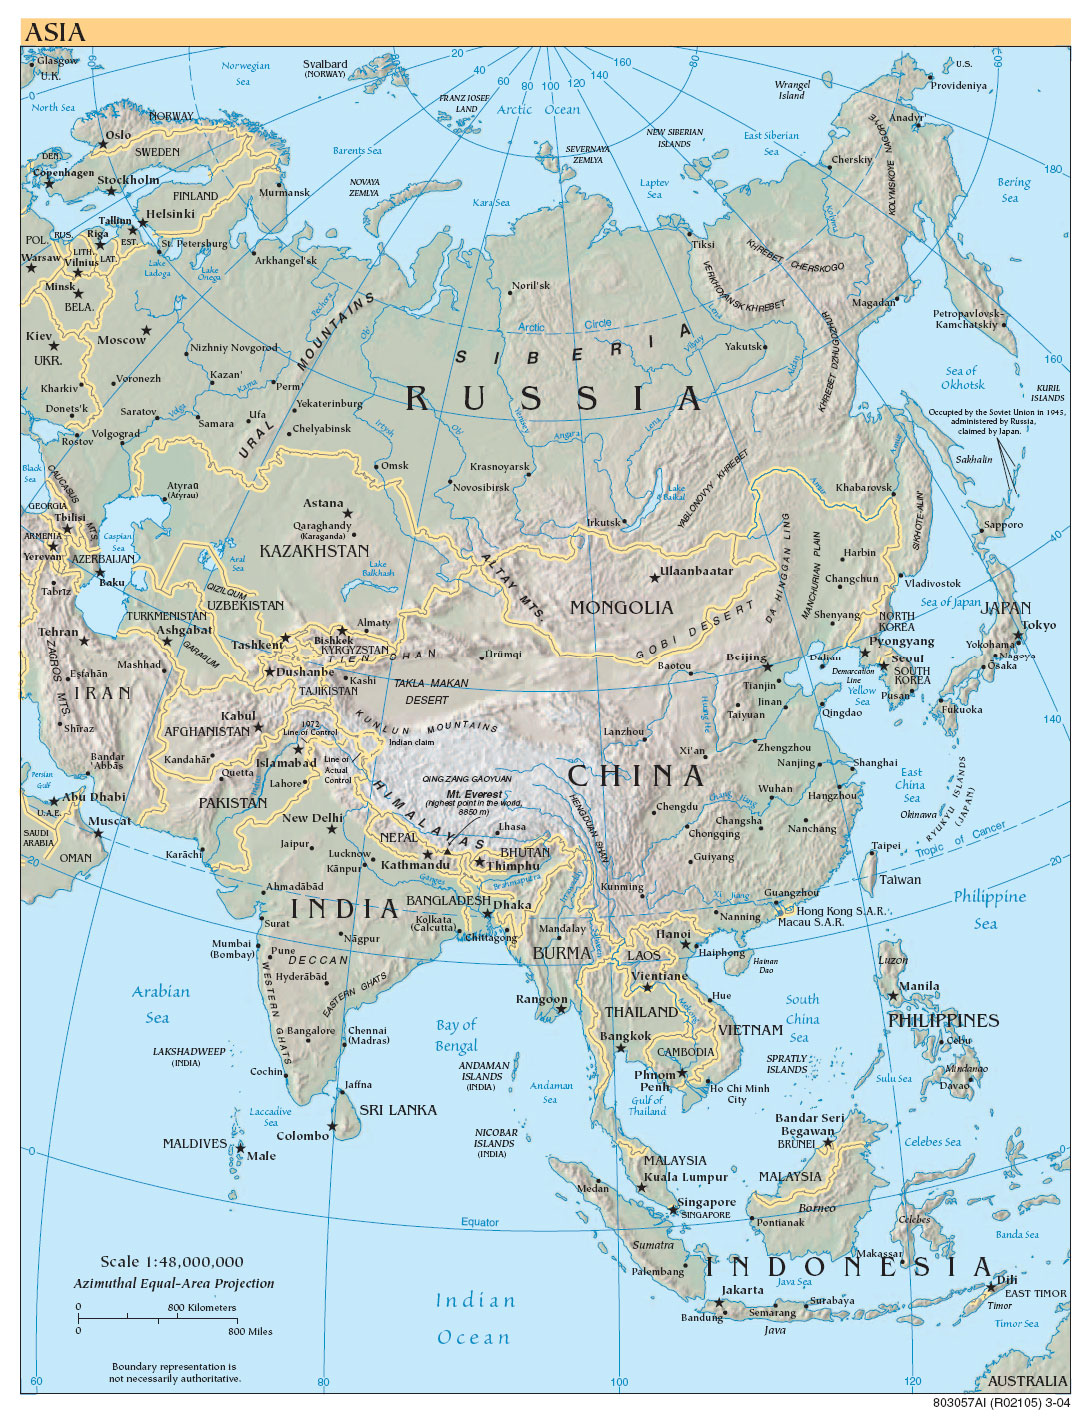 Geographic map of Asia